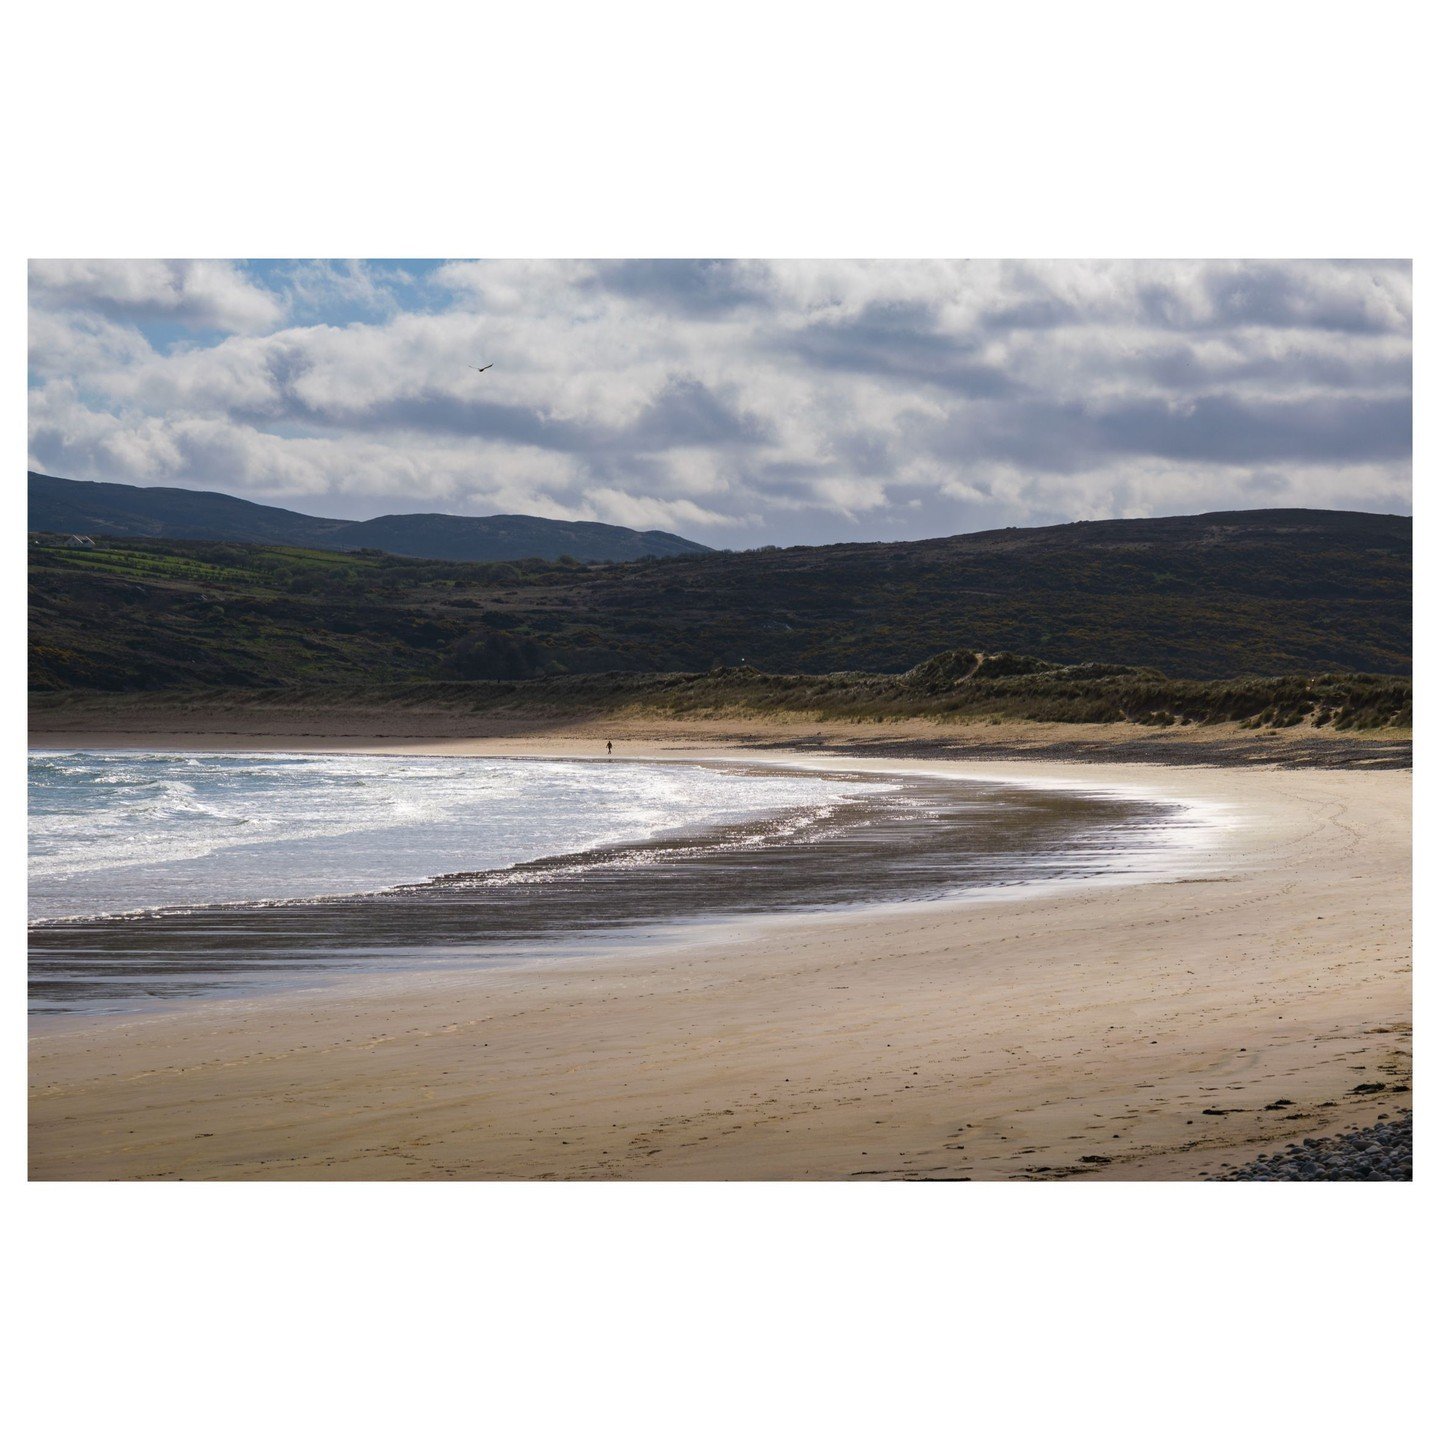 Another day, another beach! I was suprised at how many beautiful beaches there are in Donegal on the Inishowen peninsula - and at this time of the year they're almost  completely deserted ! This was Tullagh Strand!

#wildatlanticway #Ireland #donegal